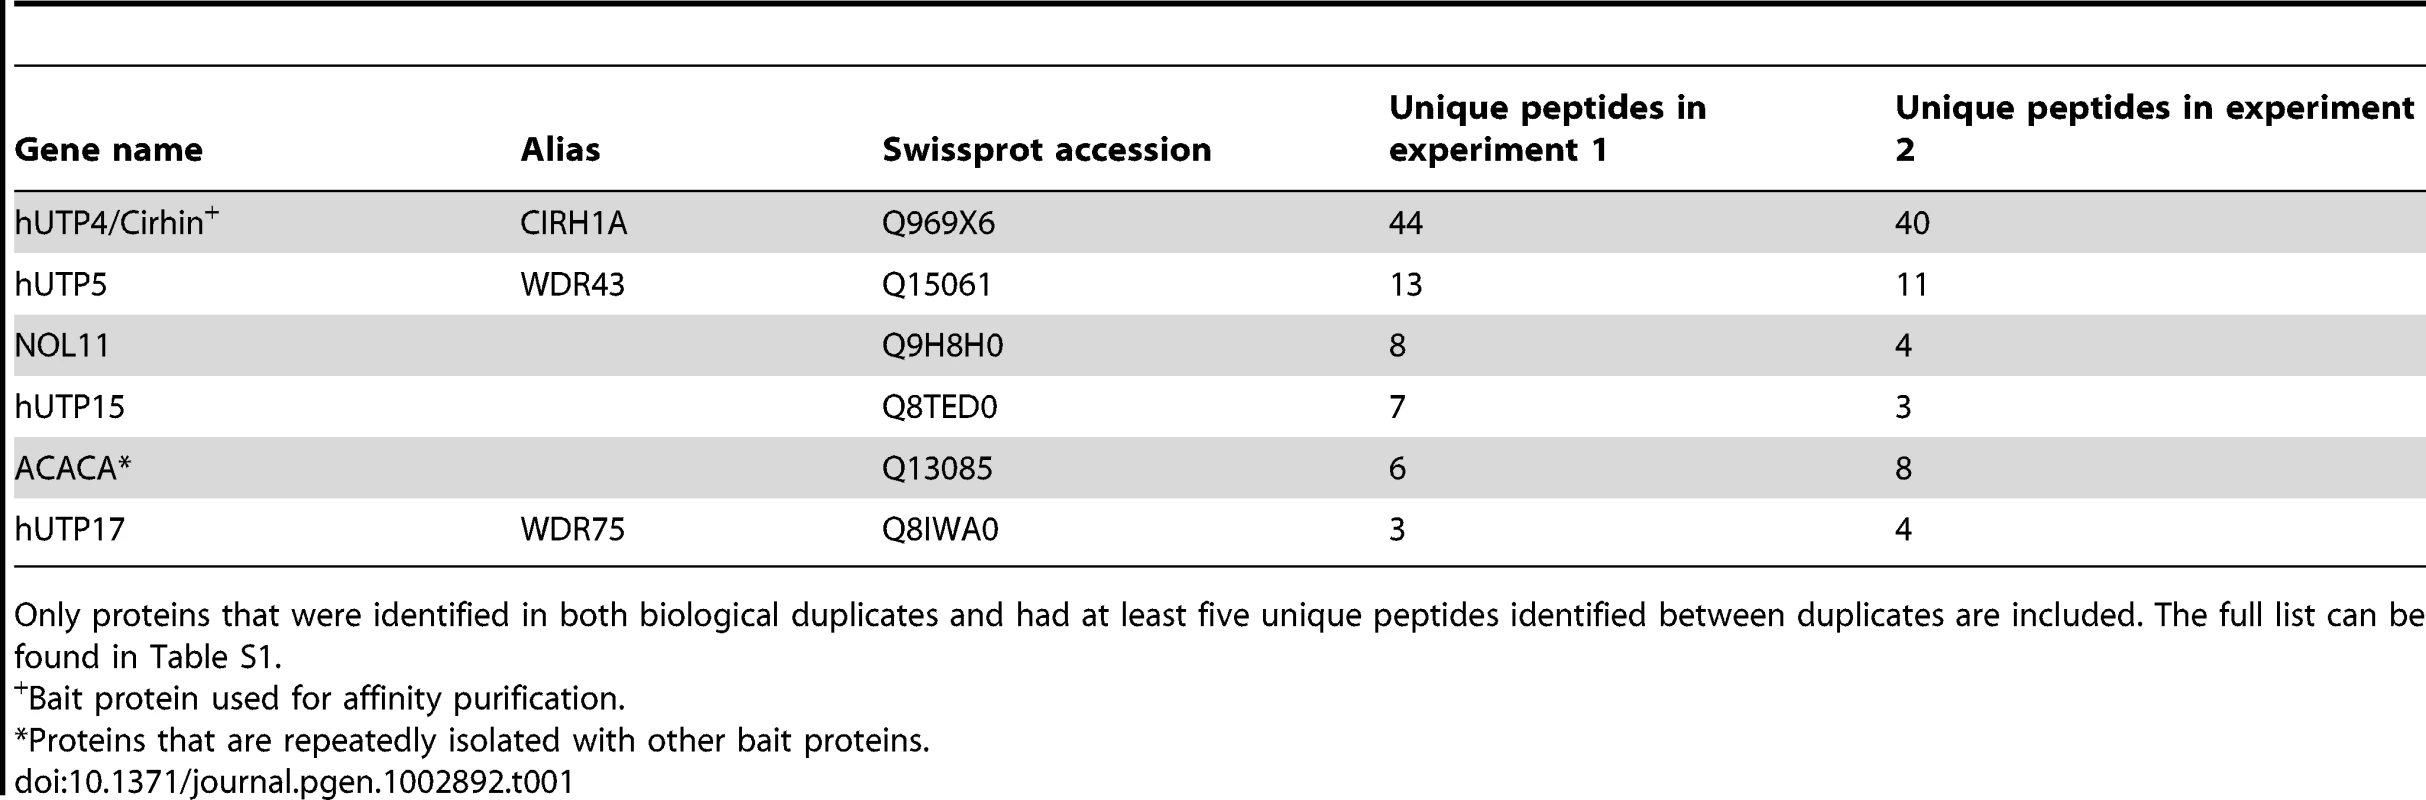 Proteins that co-purify with hUTP4/Cirhin identified by mass spectrometry.